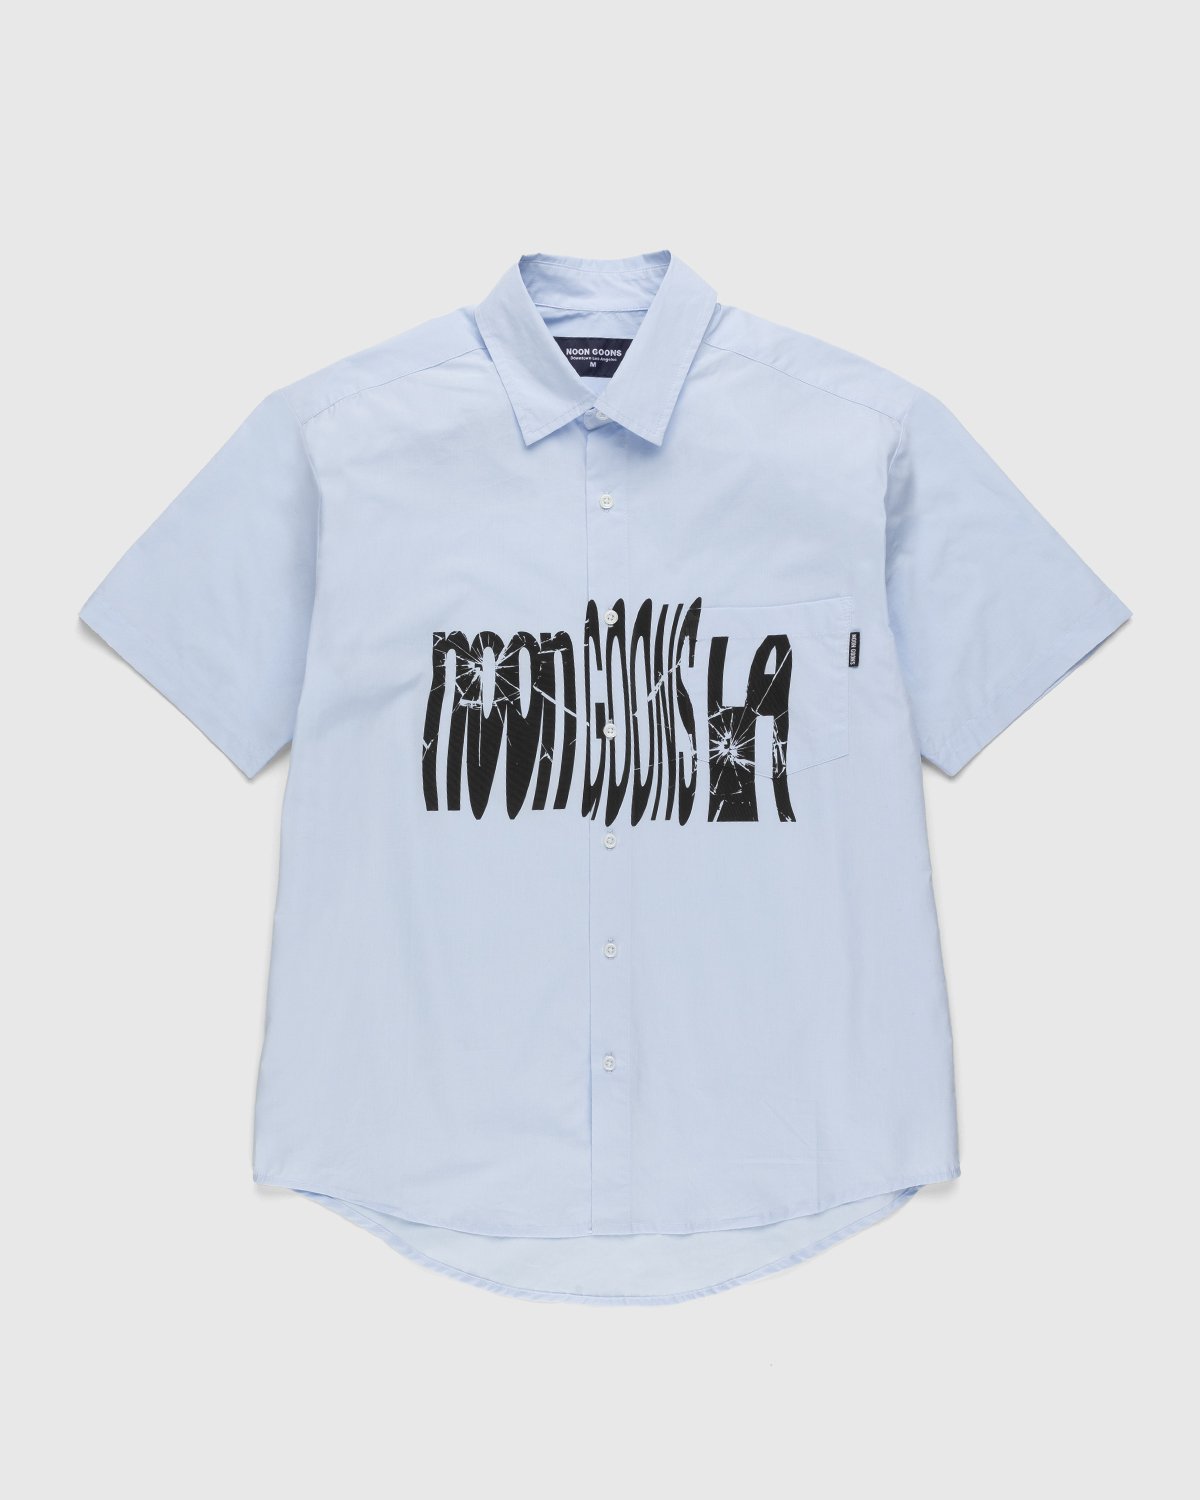 Noon Goons - Shattered Shirt Blue Shadow - Clothing - Blue - Image 1